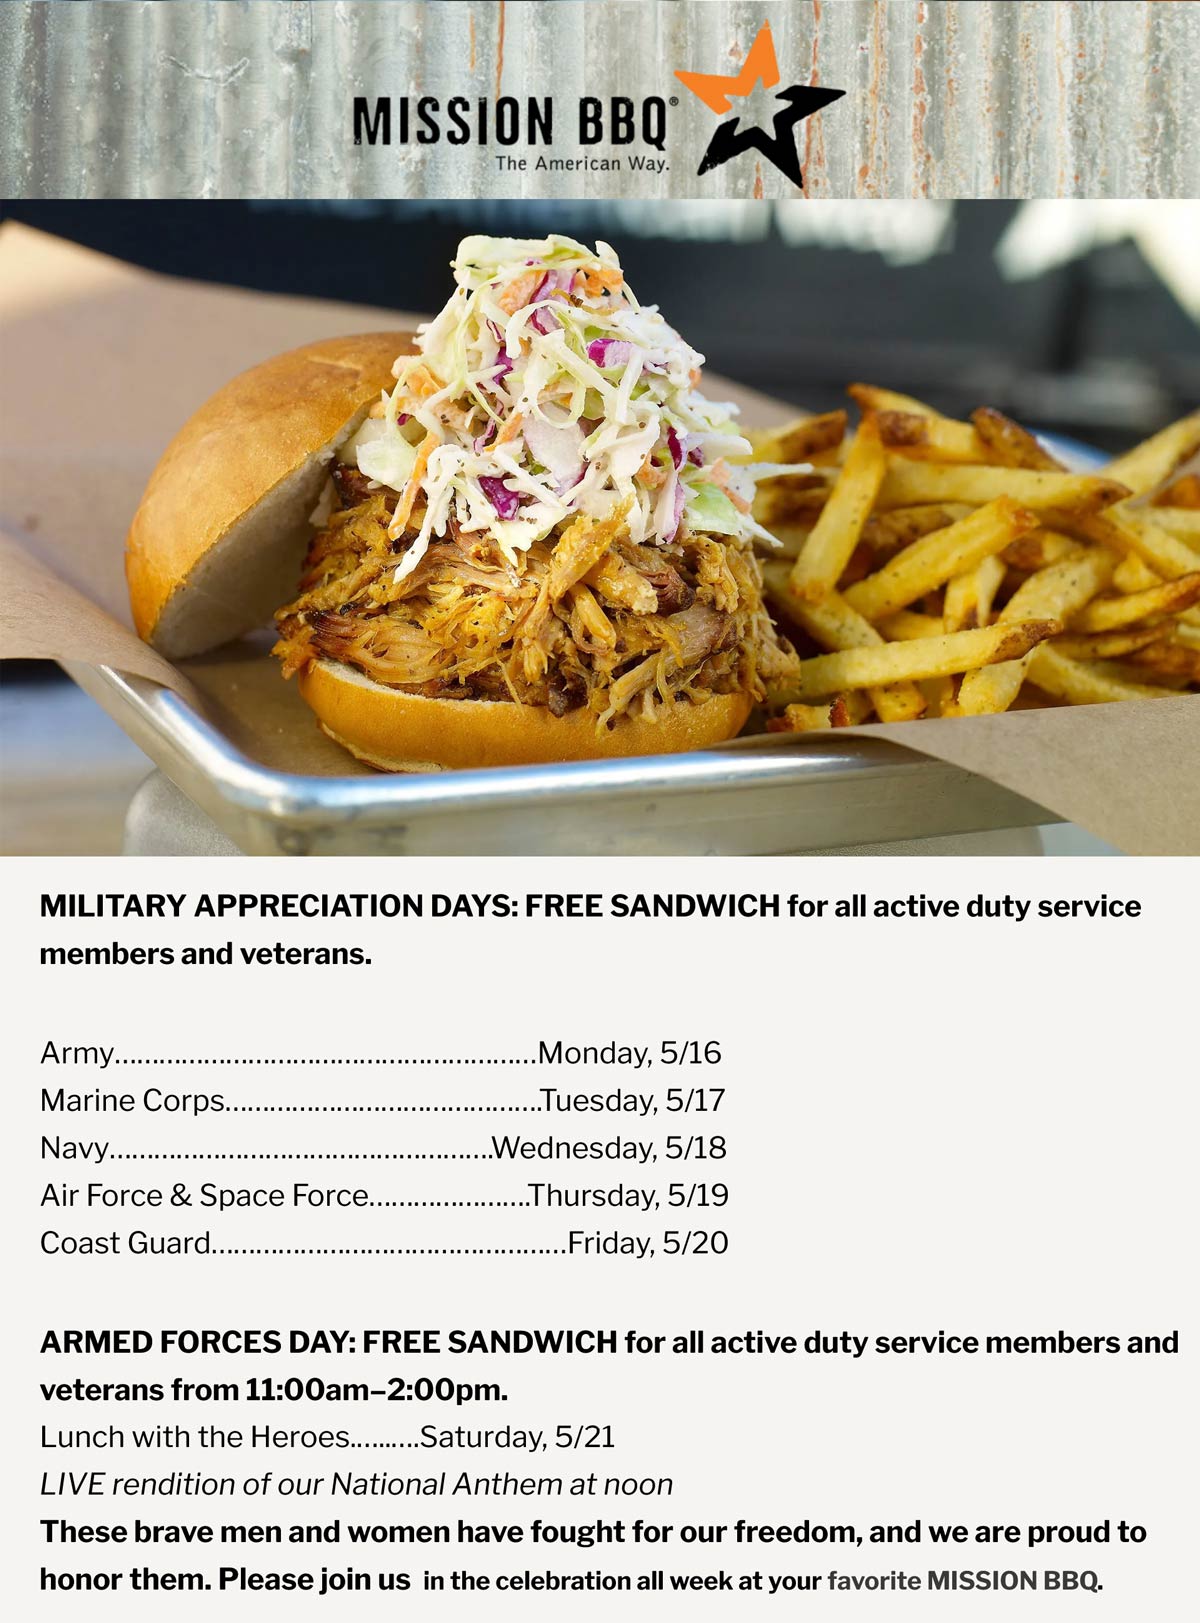 Mission BBQ restaurants Coupon  Armed forces enjoy a free sandwich at Mission BBQ #missionbbq 